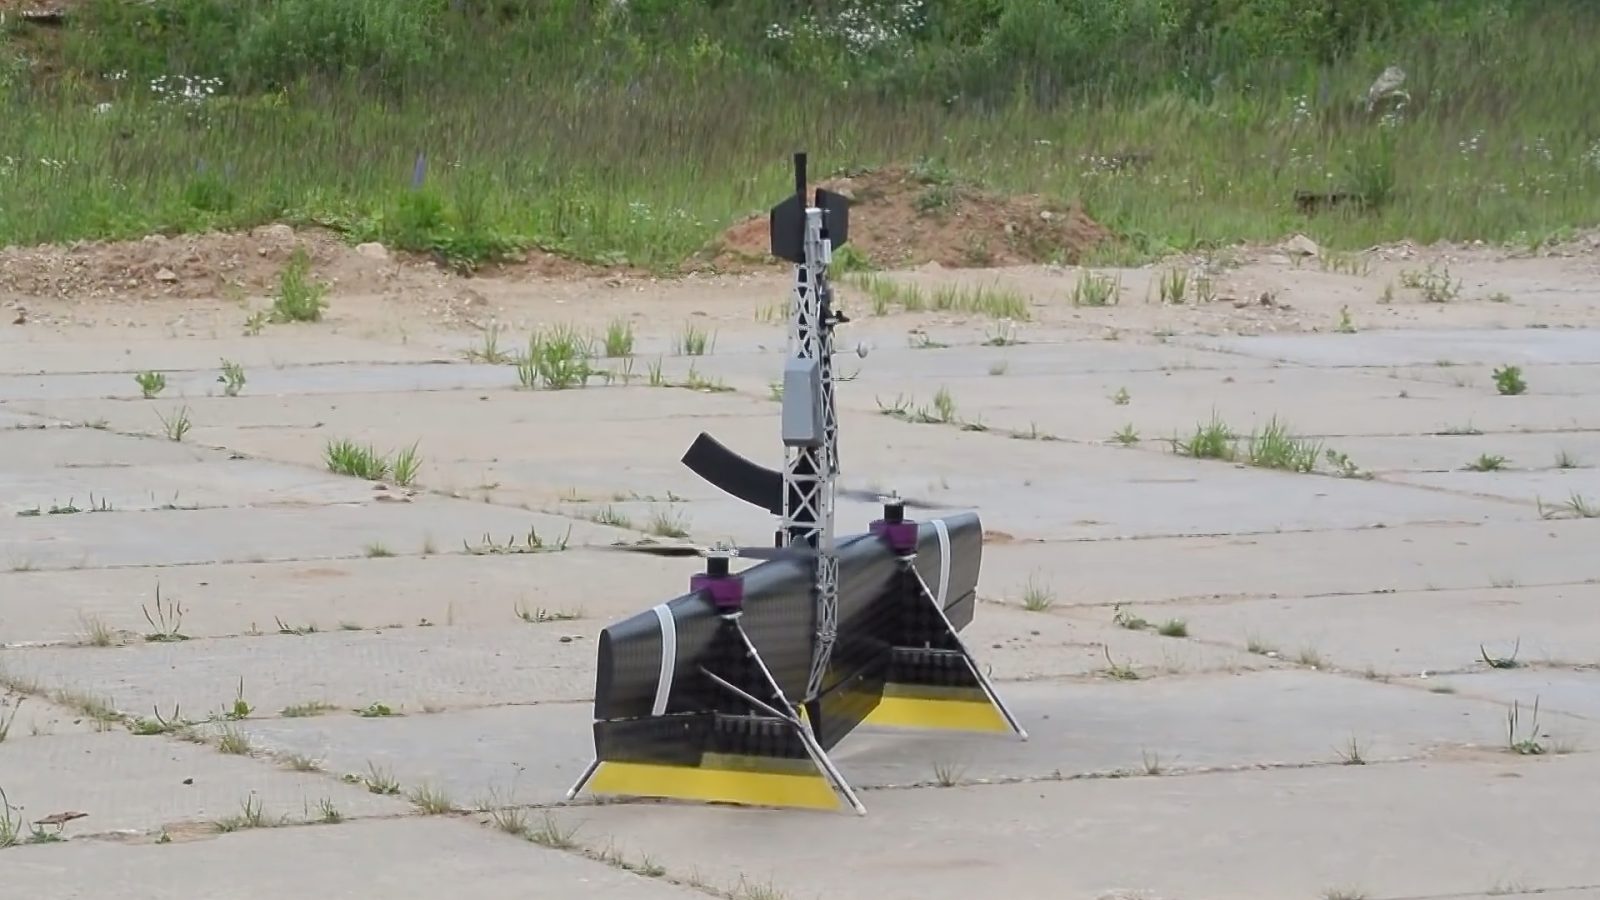 Russian shotgun-wielding drone shoots other drones out of the sky